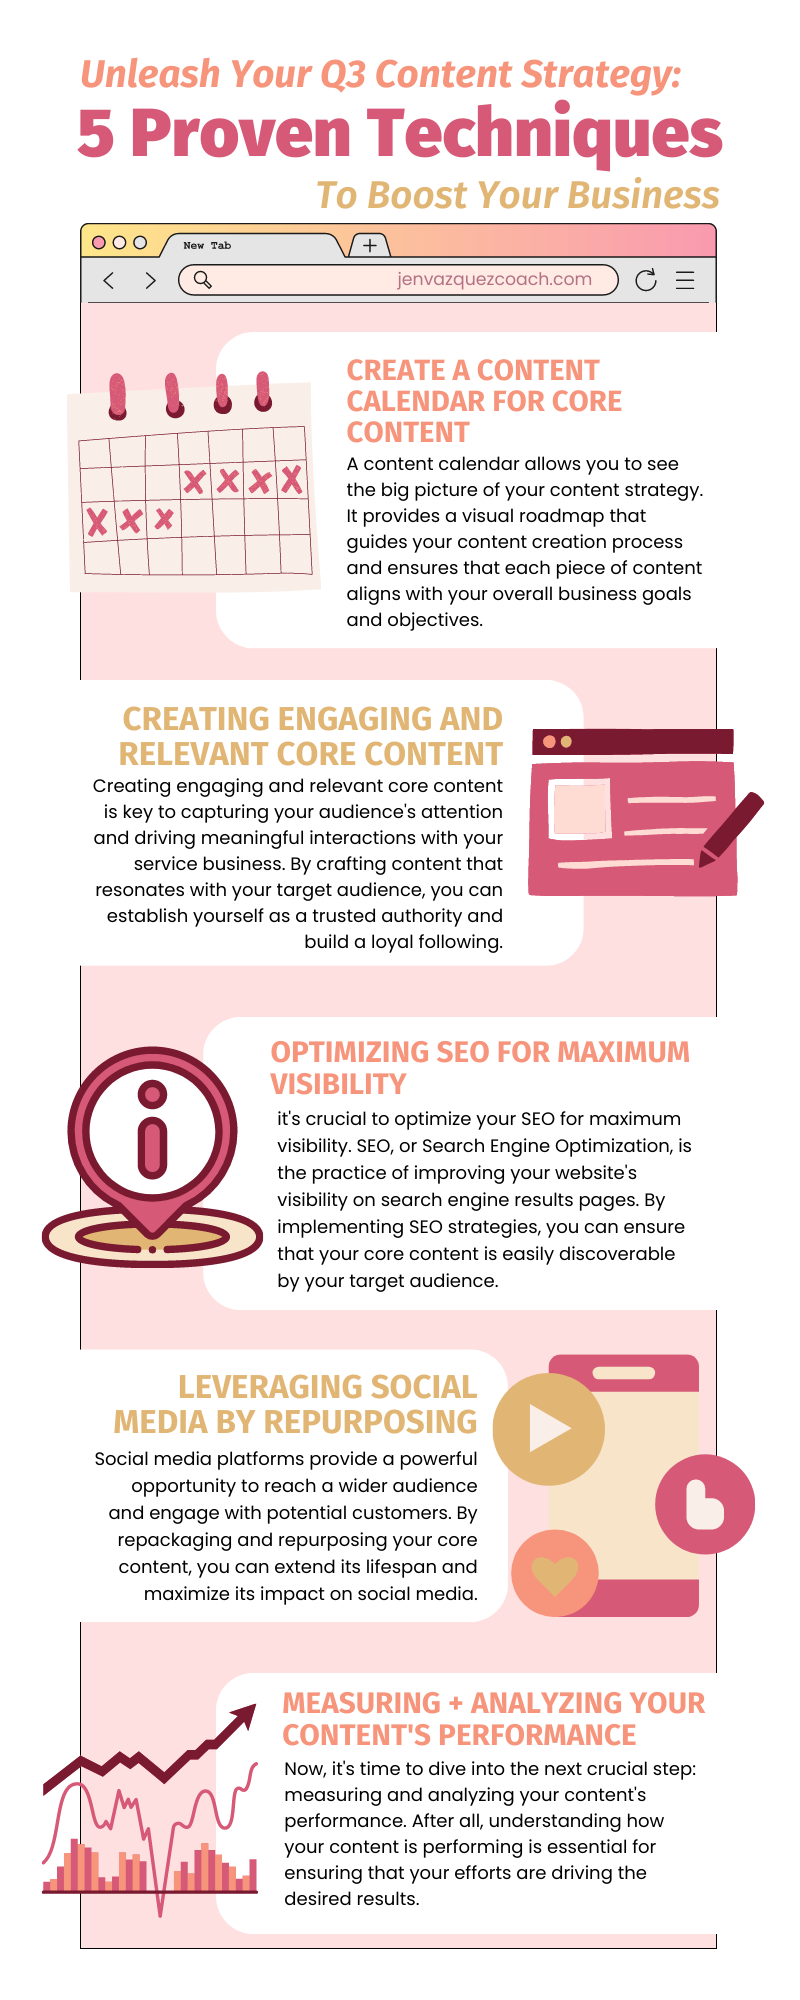 Q3 Content Strategy 5 Proven Techniques to Boost Your Service-Based Business info graphic by jen vazquez media